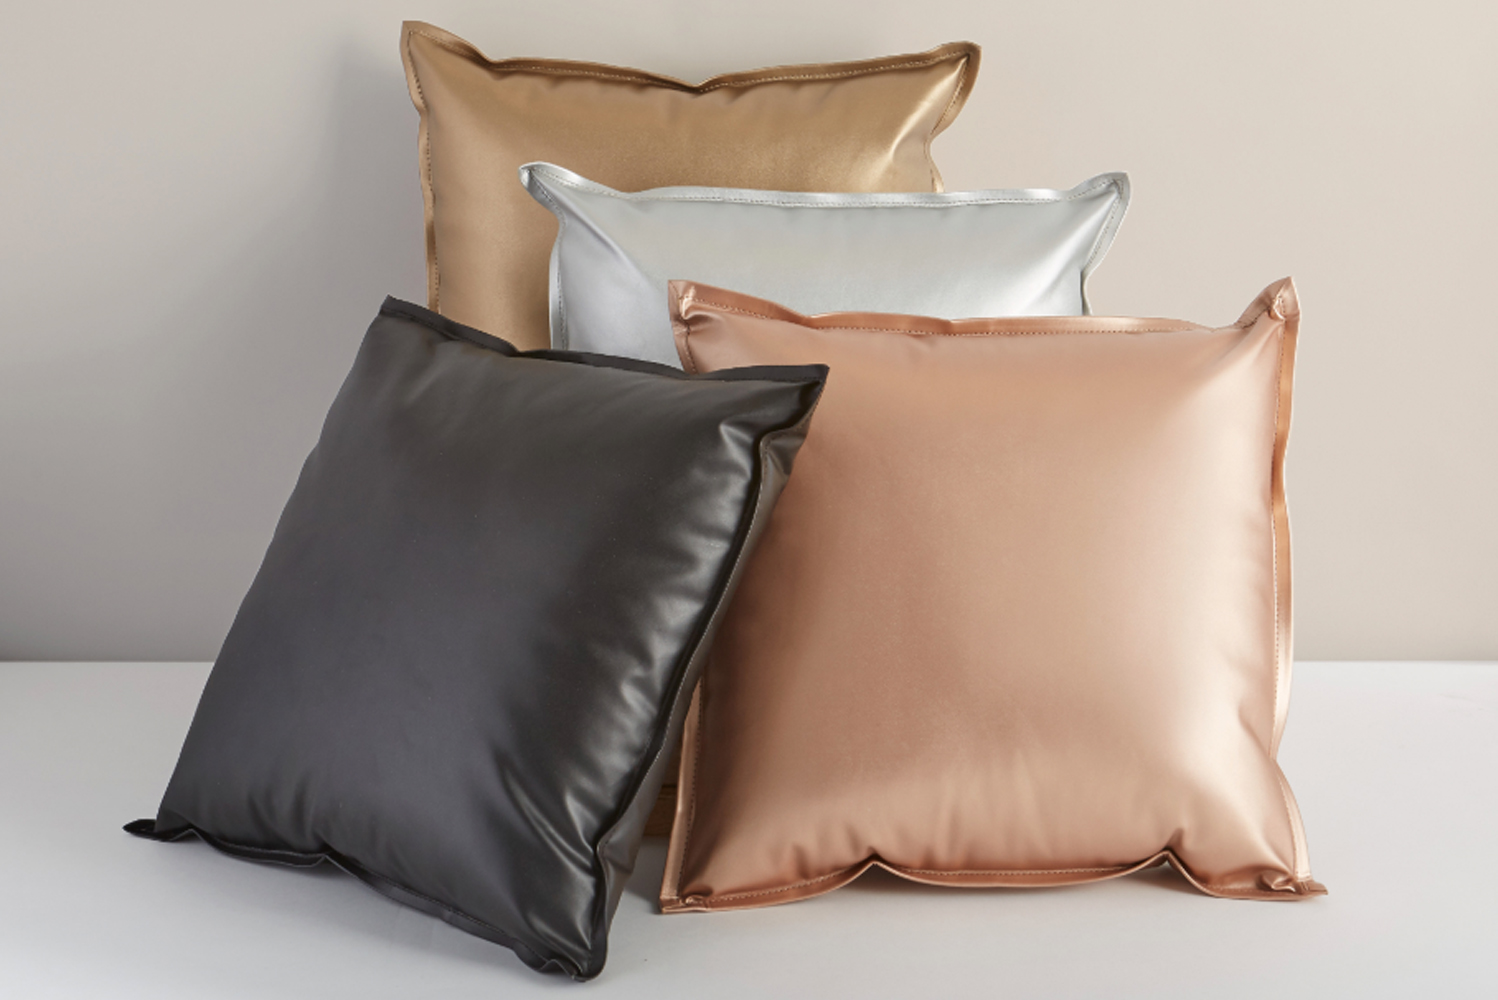 Paradigm Trends launched new pillows